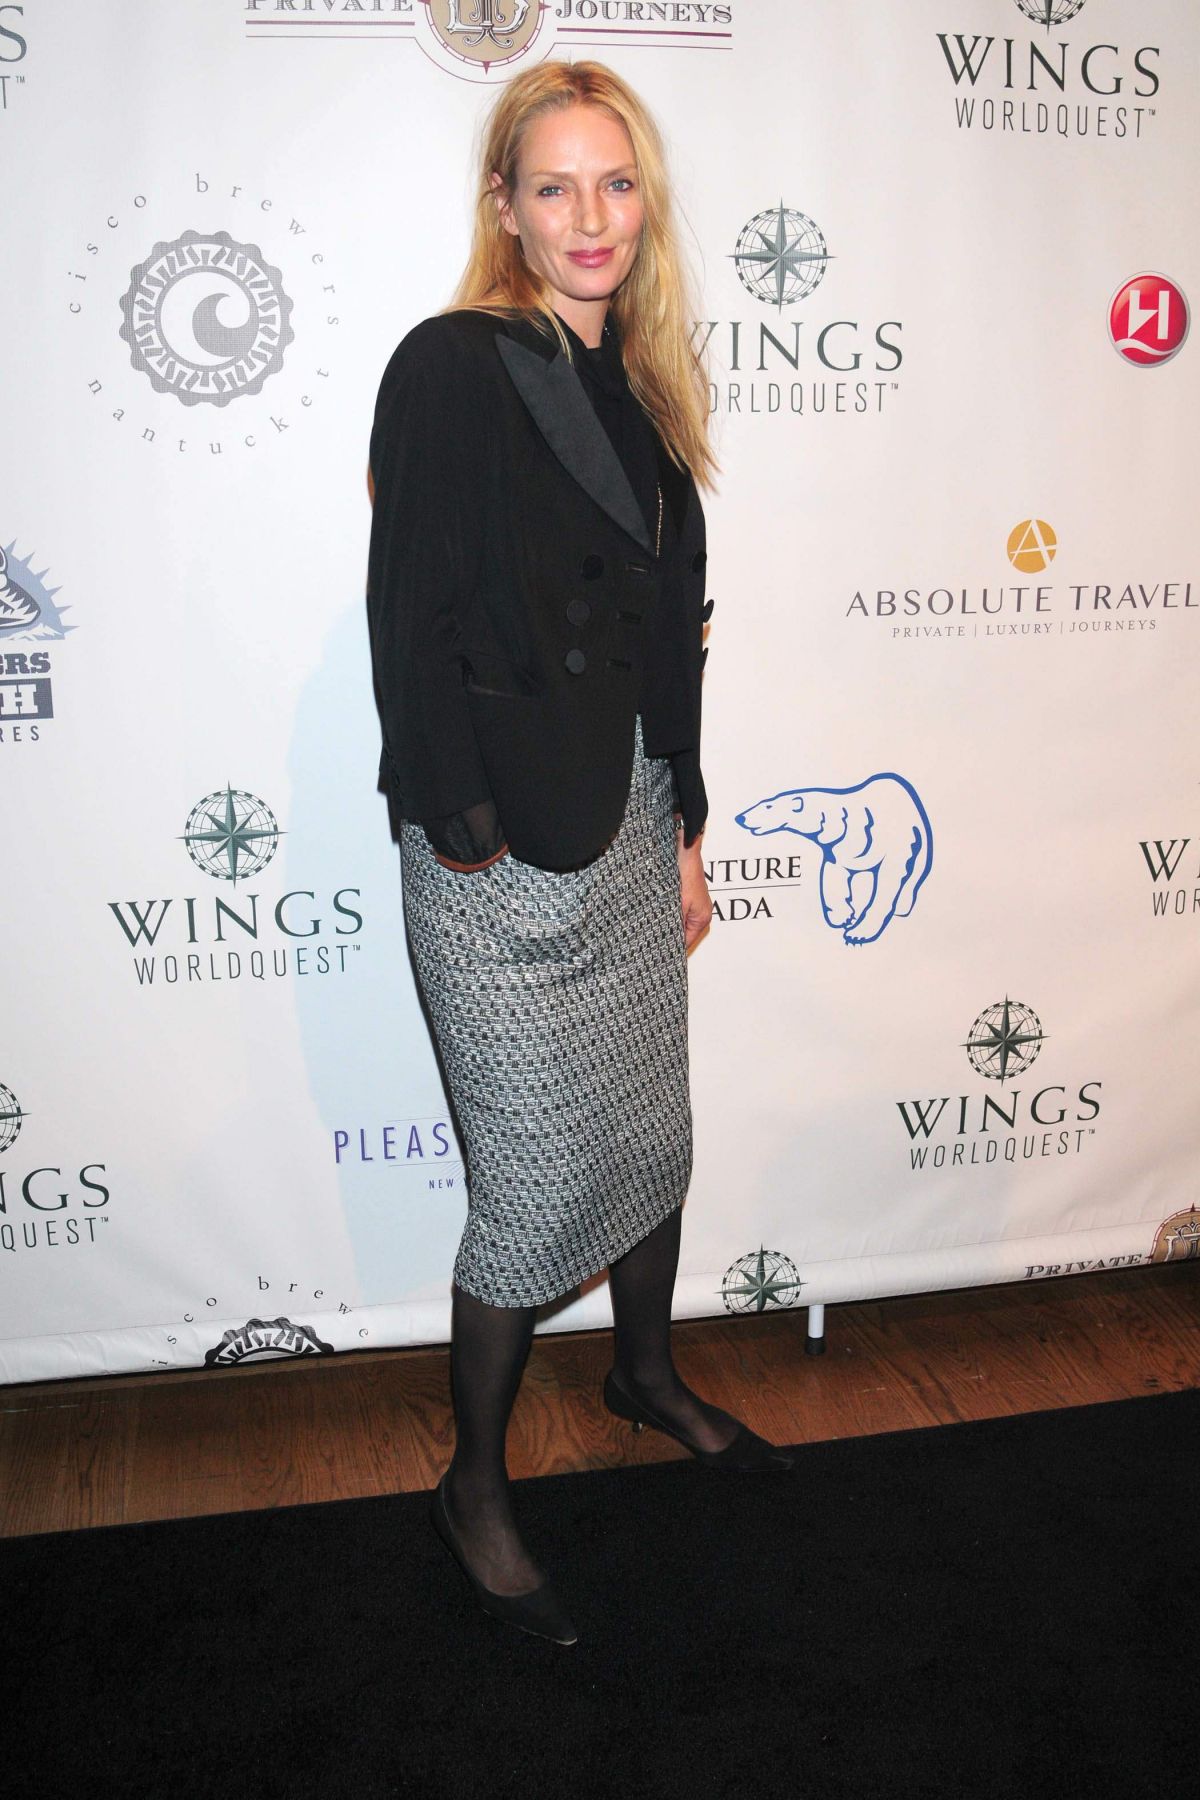 UMA THURMAN at 2014 Wings Worldquest Women of Discovery Awards – HawtCelebs